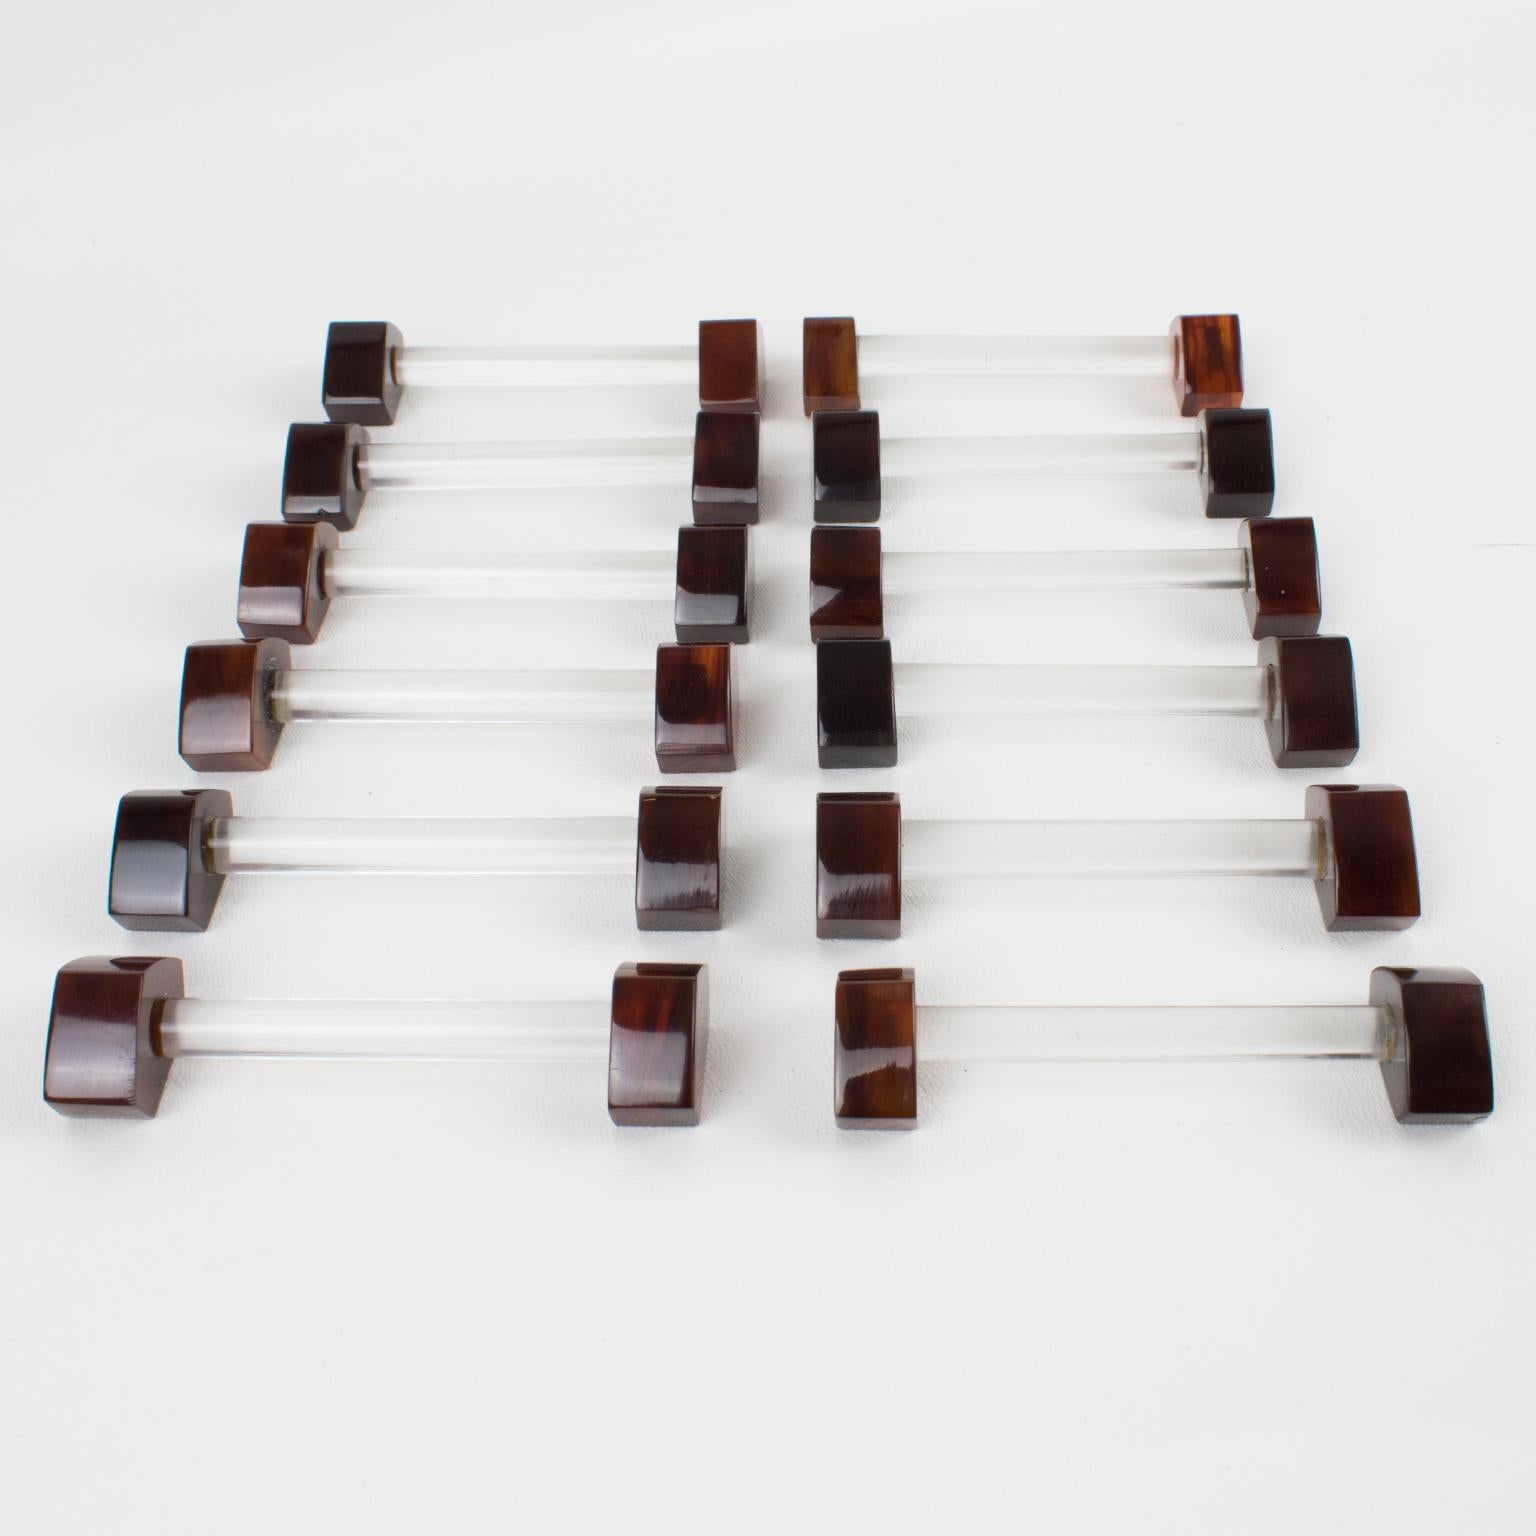 Mid-20th Century Art Deco Bakelite and Glass Chopstick Knife Rests Set, 12 pieces in box For Sale